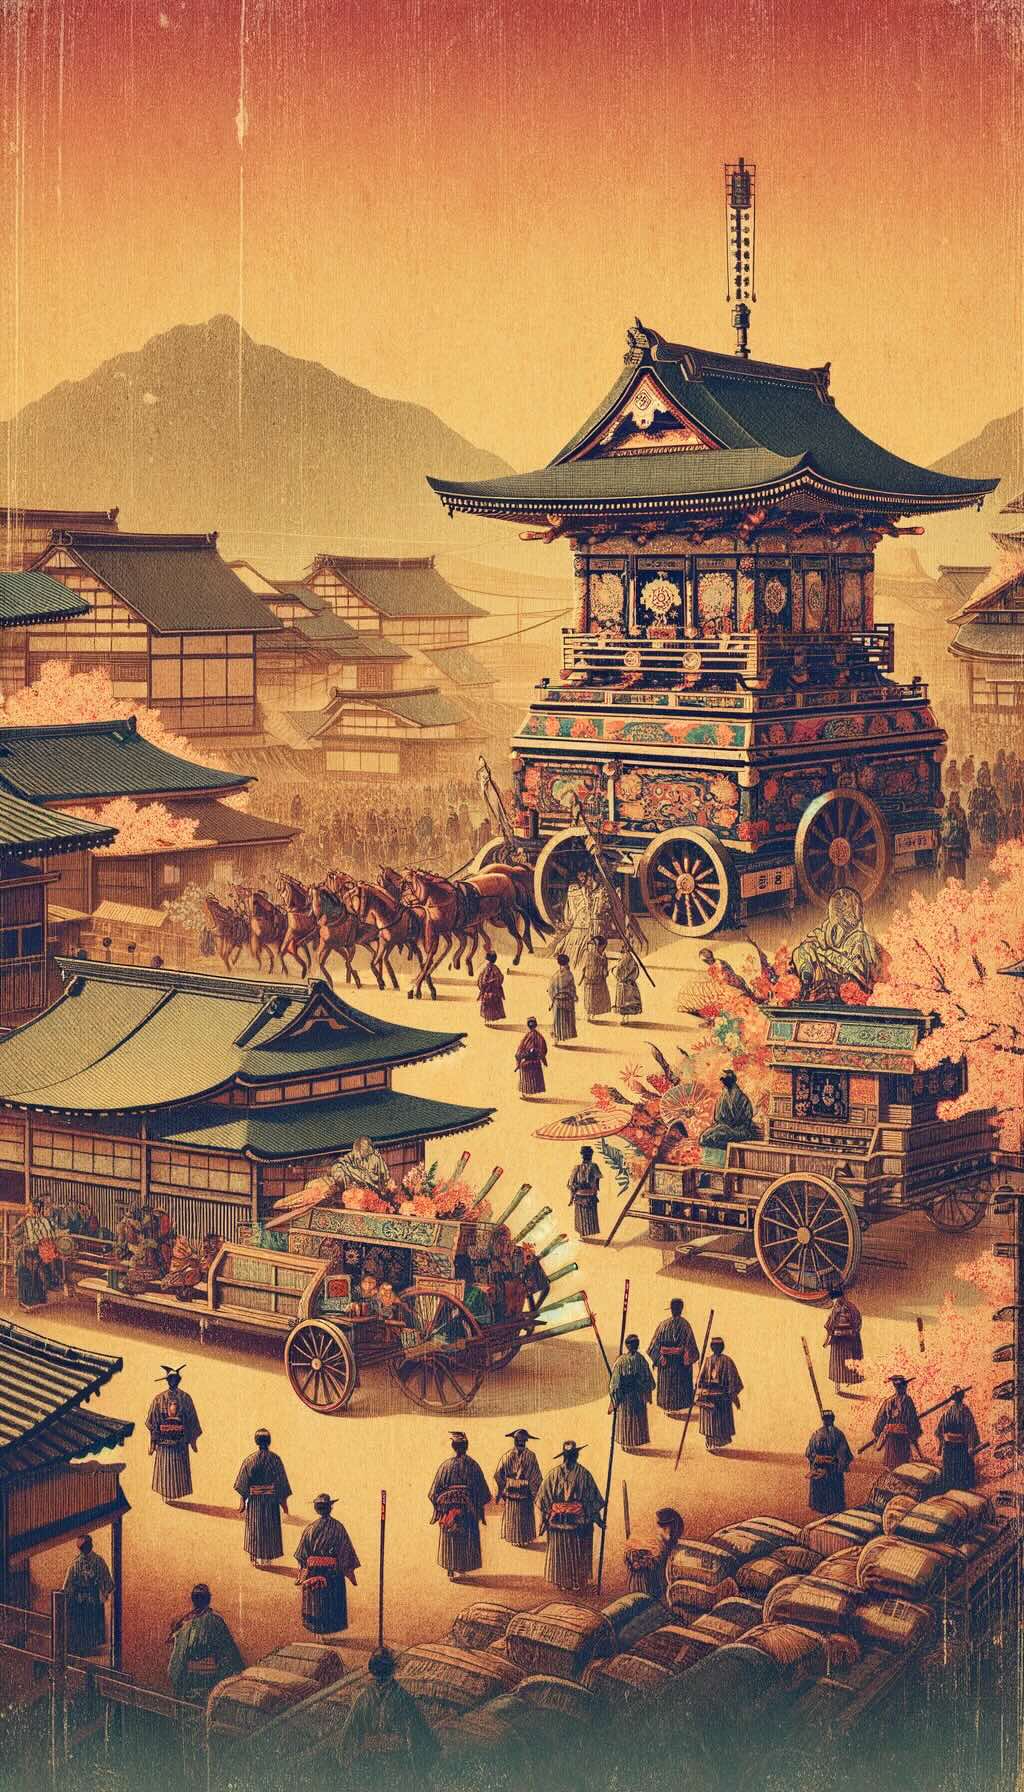 Cultural background of Matsuri festivals in Japan, portrays the historical roots with elements of ancient Shinto rituals, agricultural practices, and seasonal celebrations. The artwork captures the essence of these deeply rooted traditional celebrations, highlighting their significance in Japanese culture.